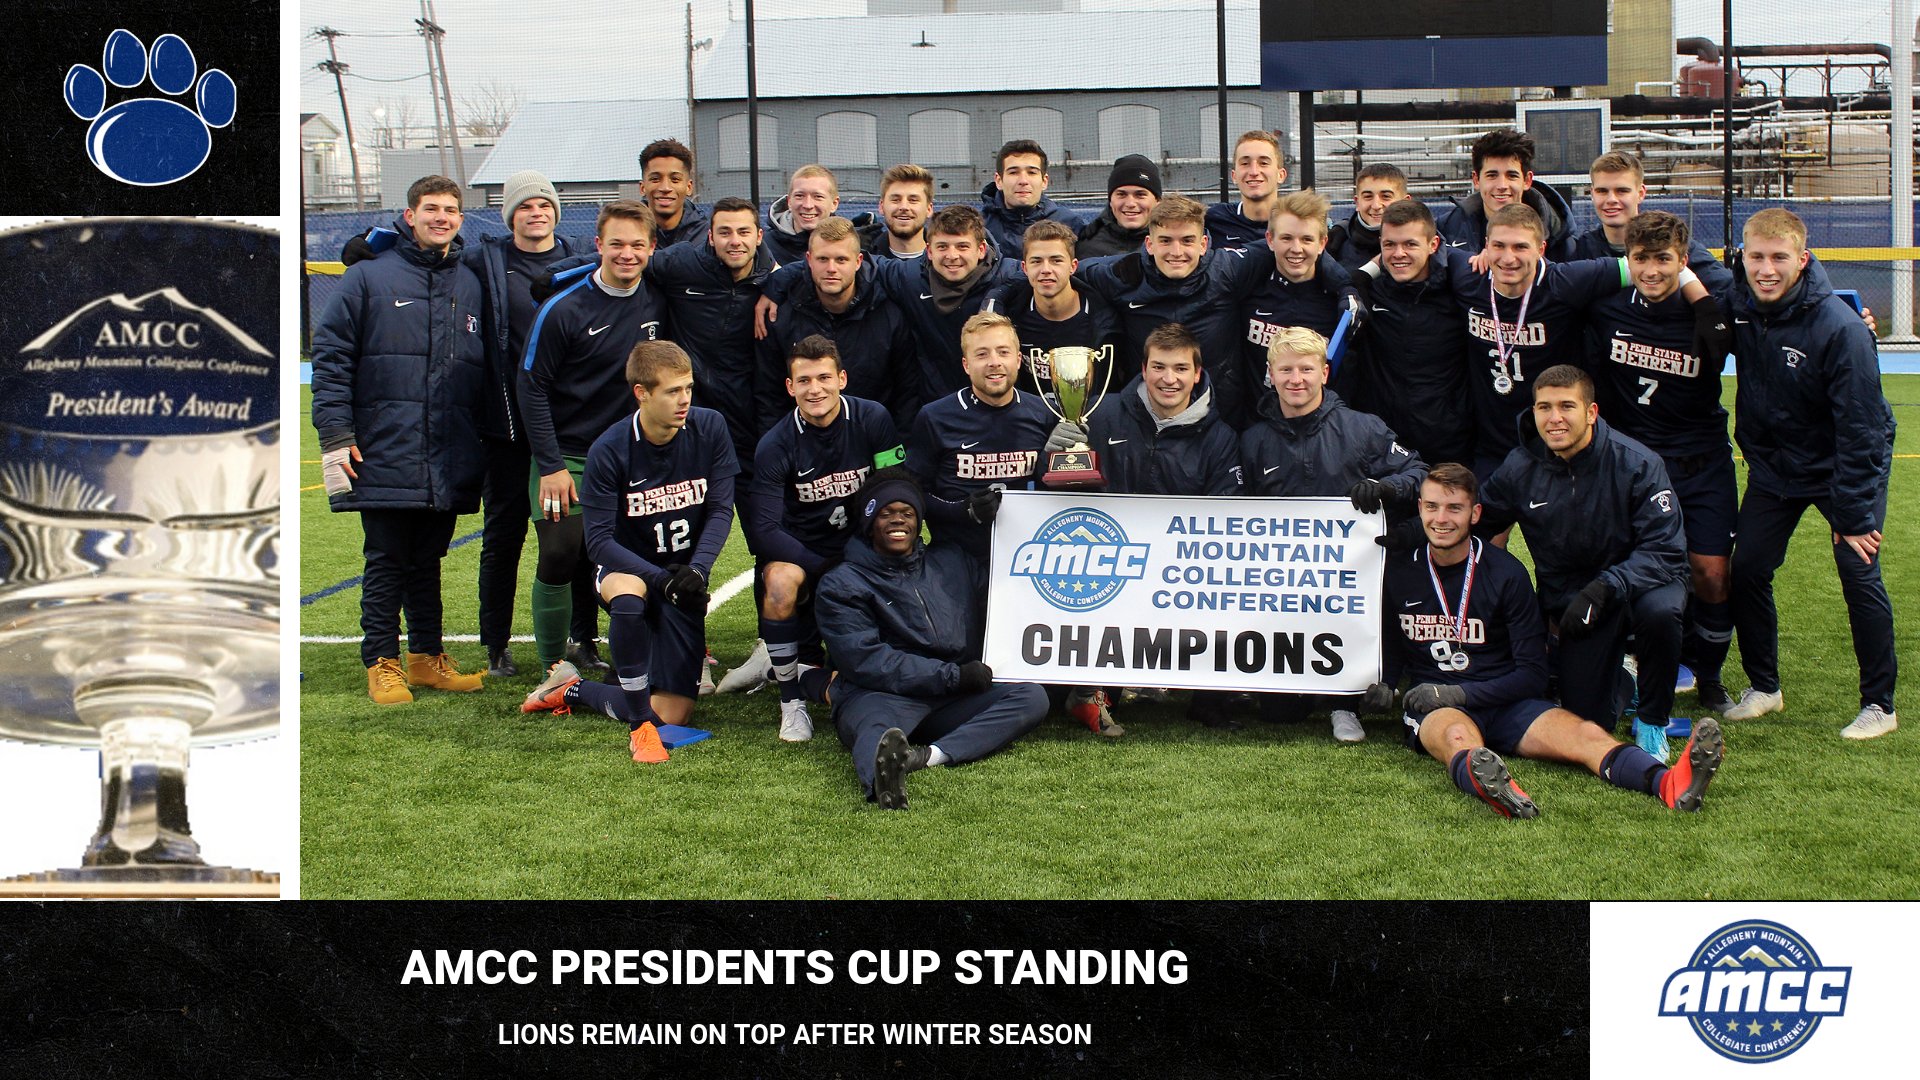 Behrend Lions Lead AMCC Presidents Cup Standings